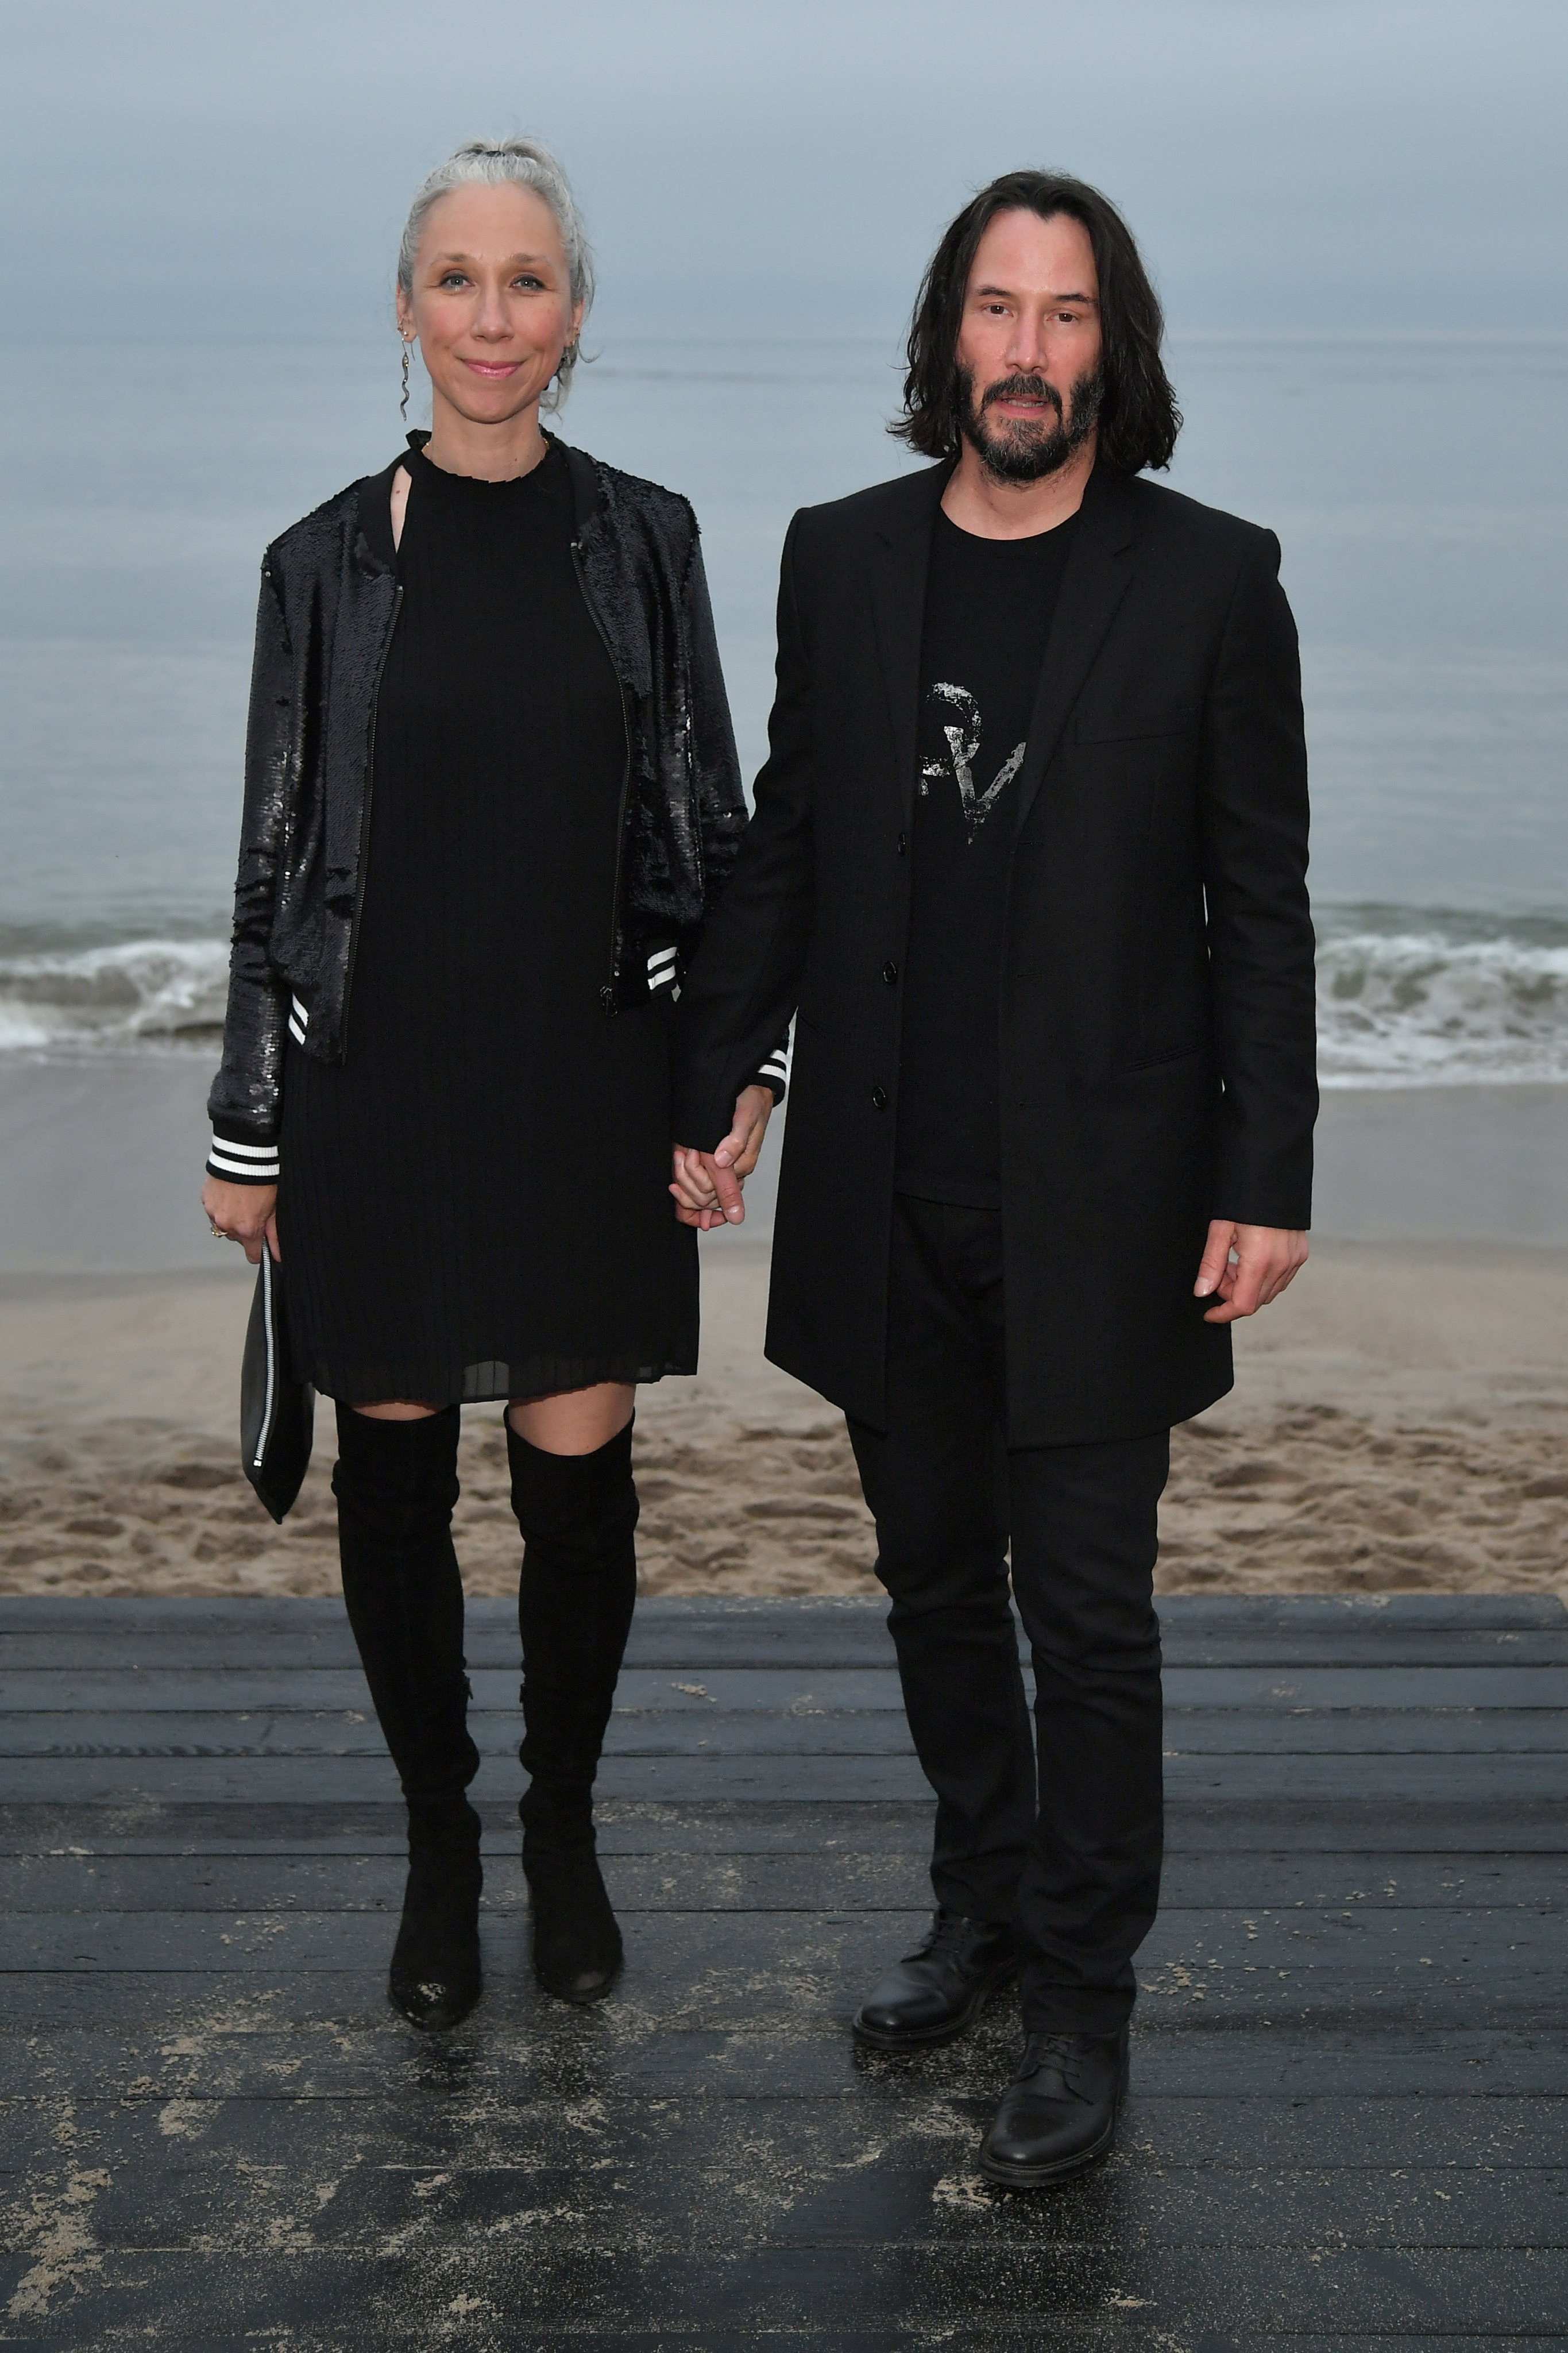 Alexandra Grant and Keanu Reeves attending Saint Laurent men’s spring/summer 2020 show in Malibu, California, in June 2019. Photo: Getty Images